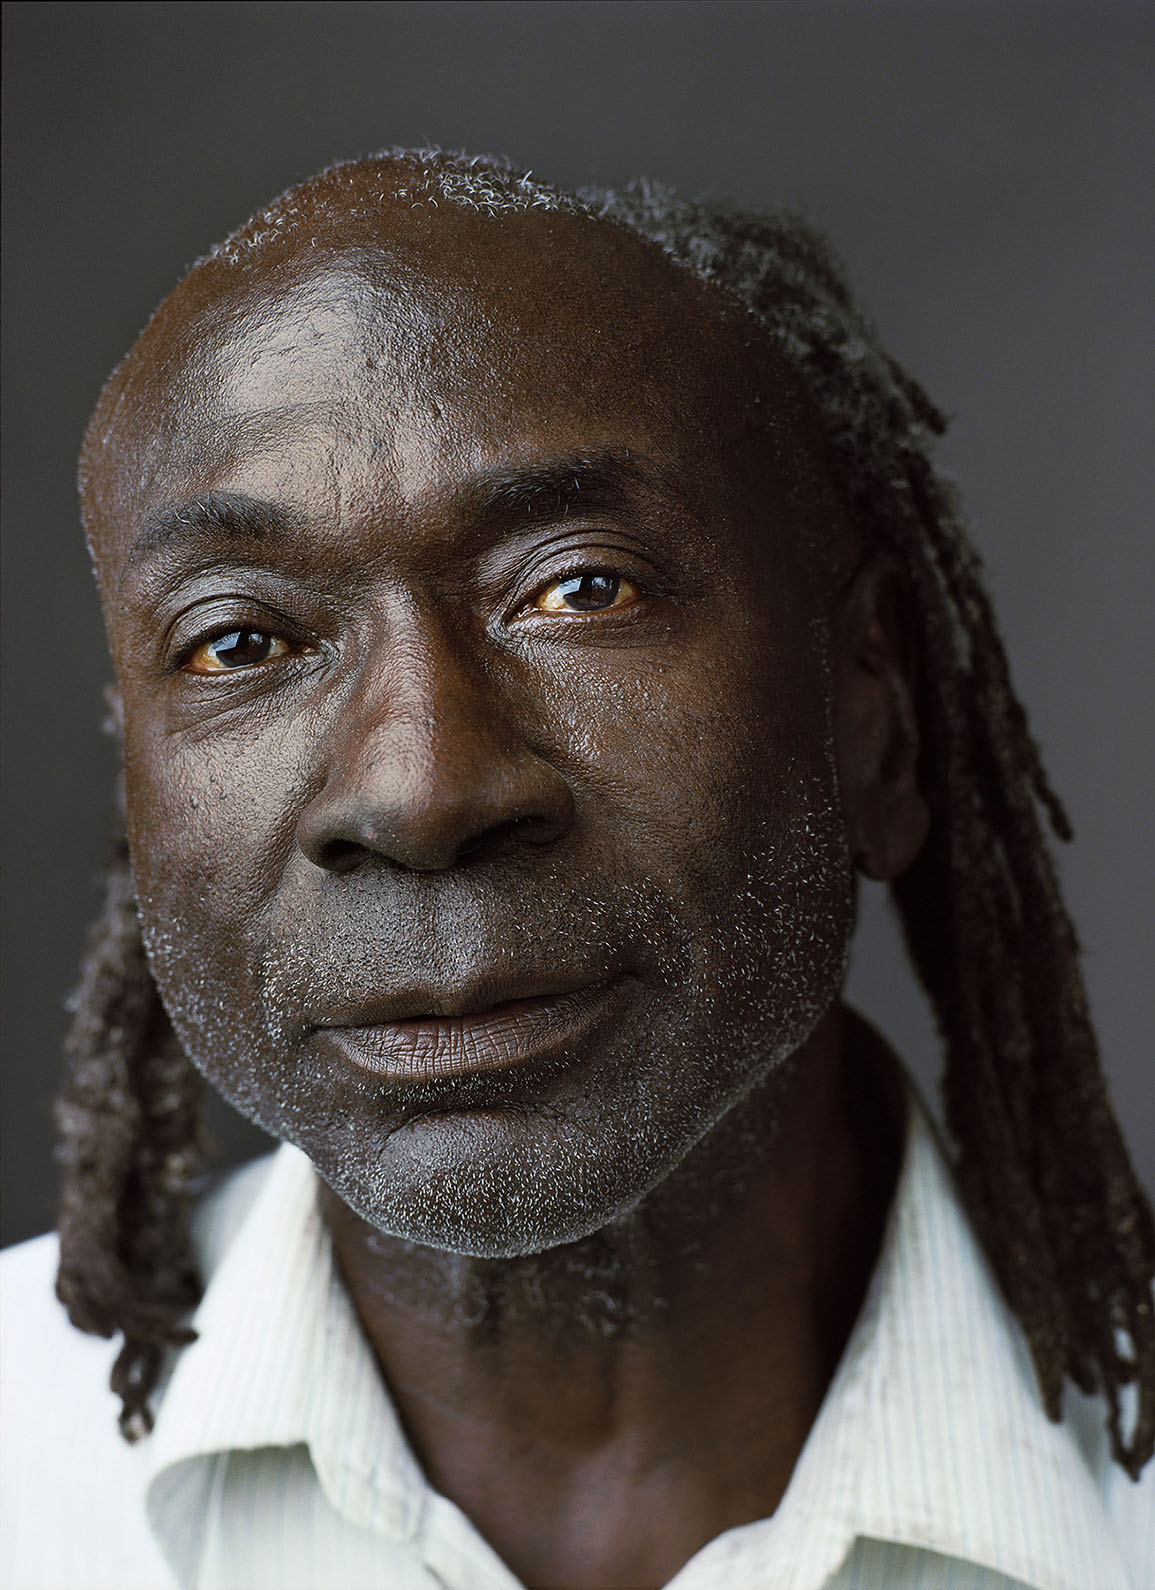 USA. "Down and Out in the South": Studio portraits of homeless people in Atlanta (GA), Columbia (SC) and the Mississippi Delta.  James (b. Hampton, SC, 1940), photographed in Atlanta, GA. June 2011.